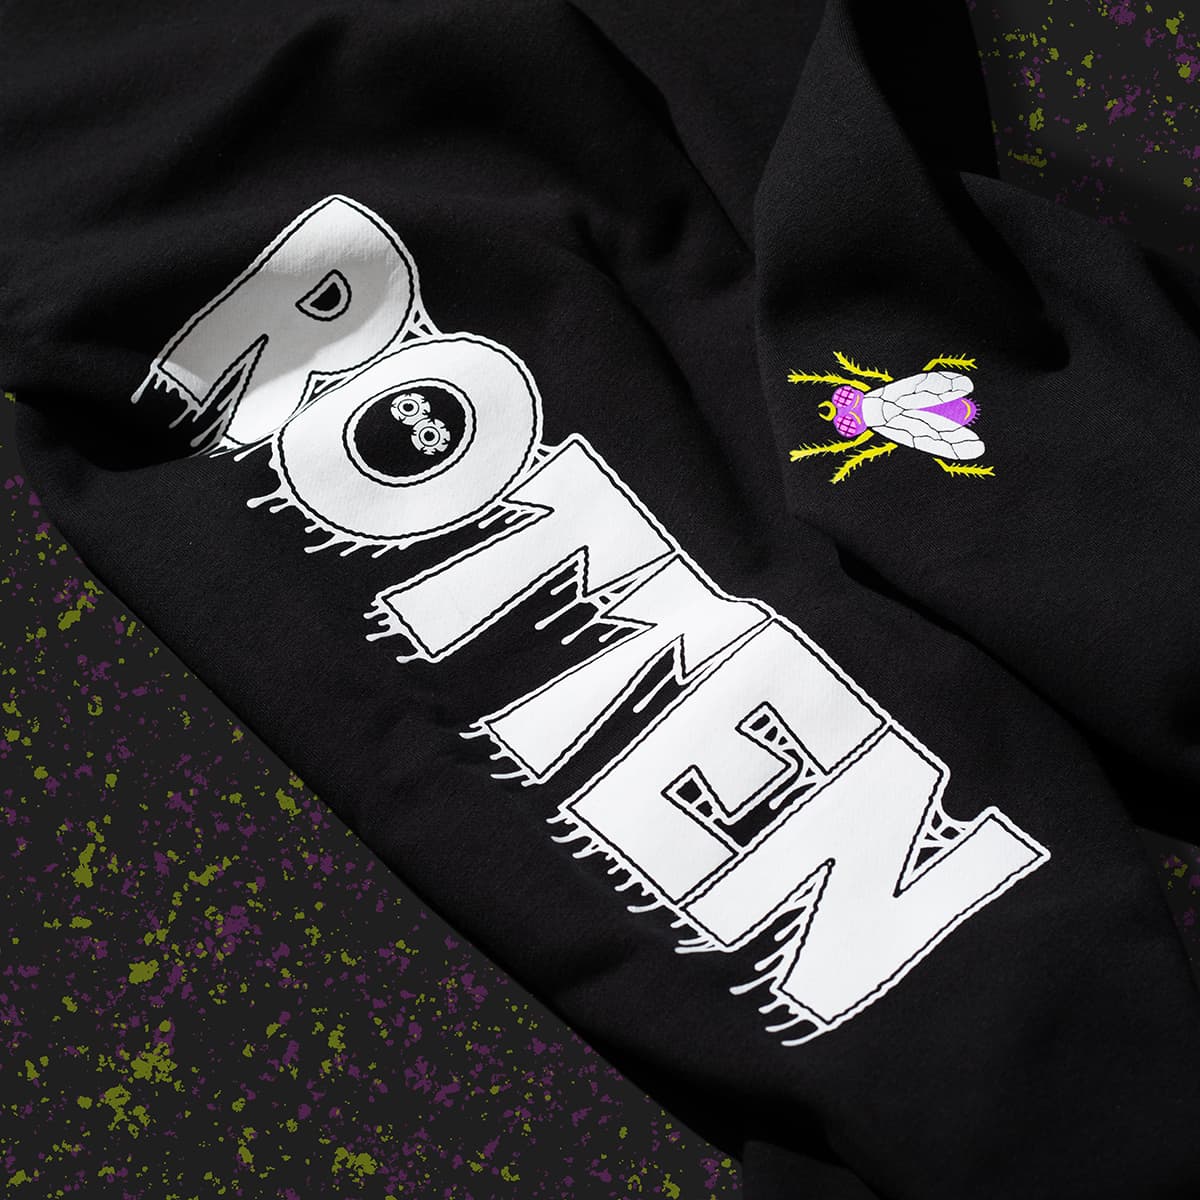 Fly Swatter Sweats | Shop Rotten™ Joggers and Sweatpants